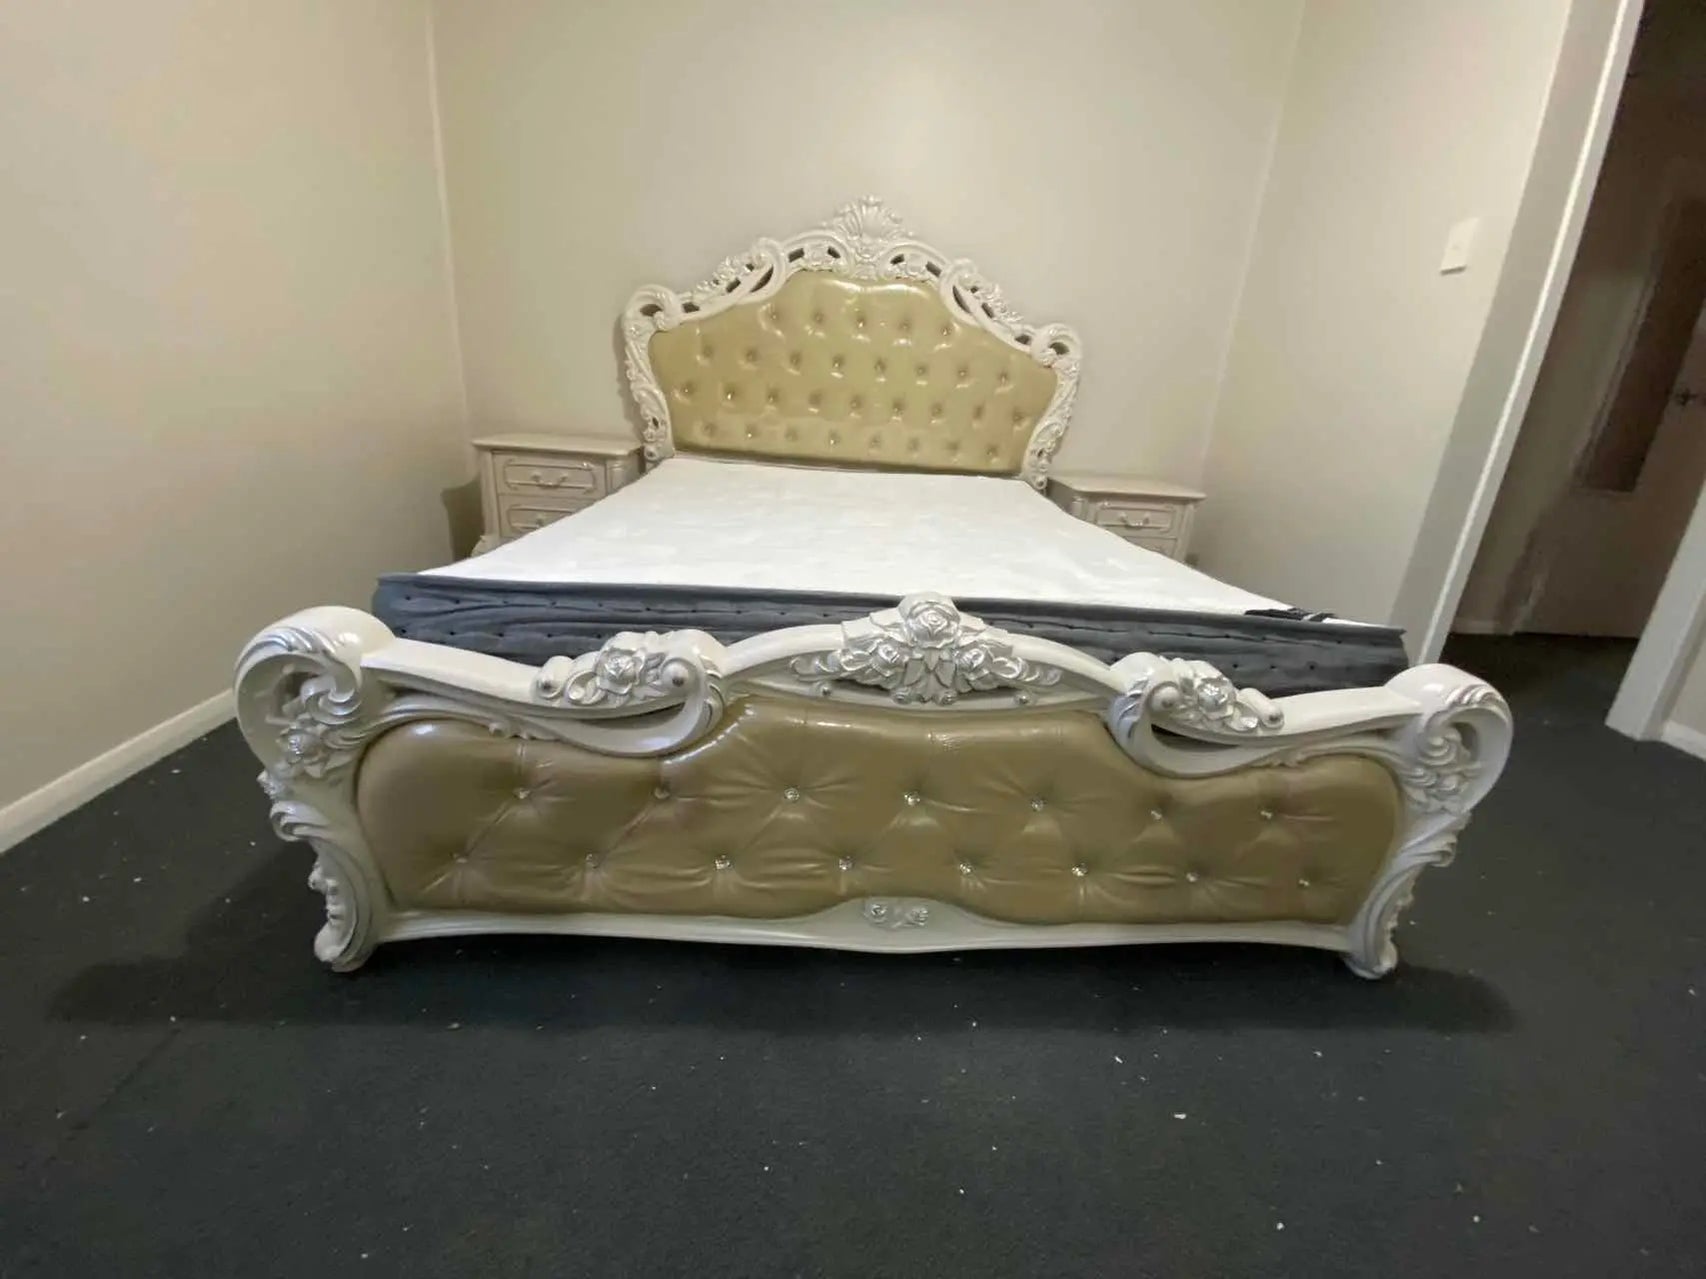 X01 Luxury Vintage Champagne Yellow/ White Frame Royal Bed - Super Outlets